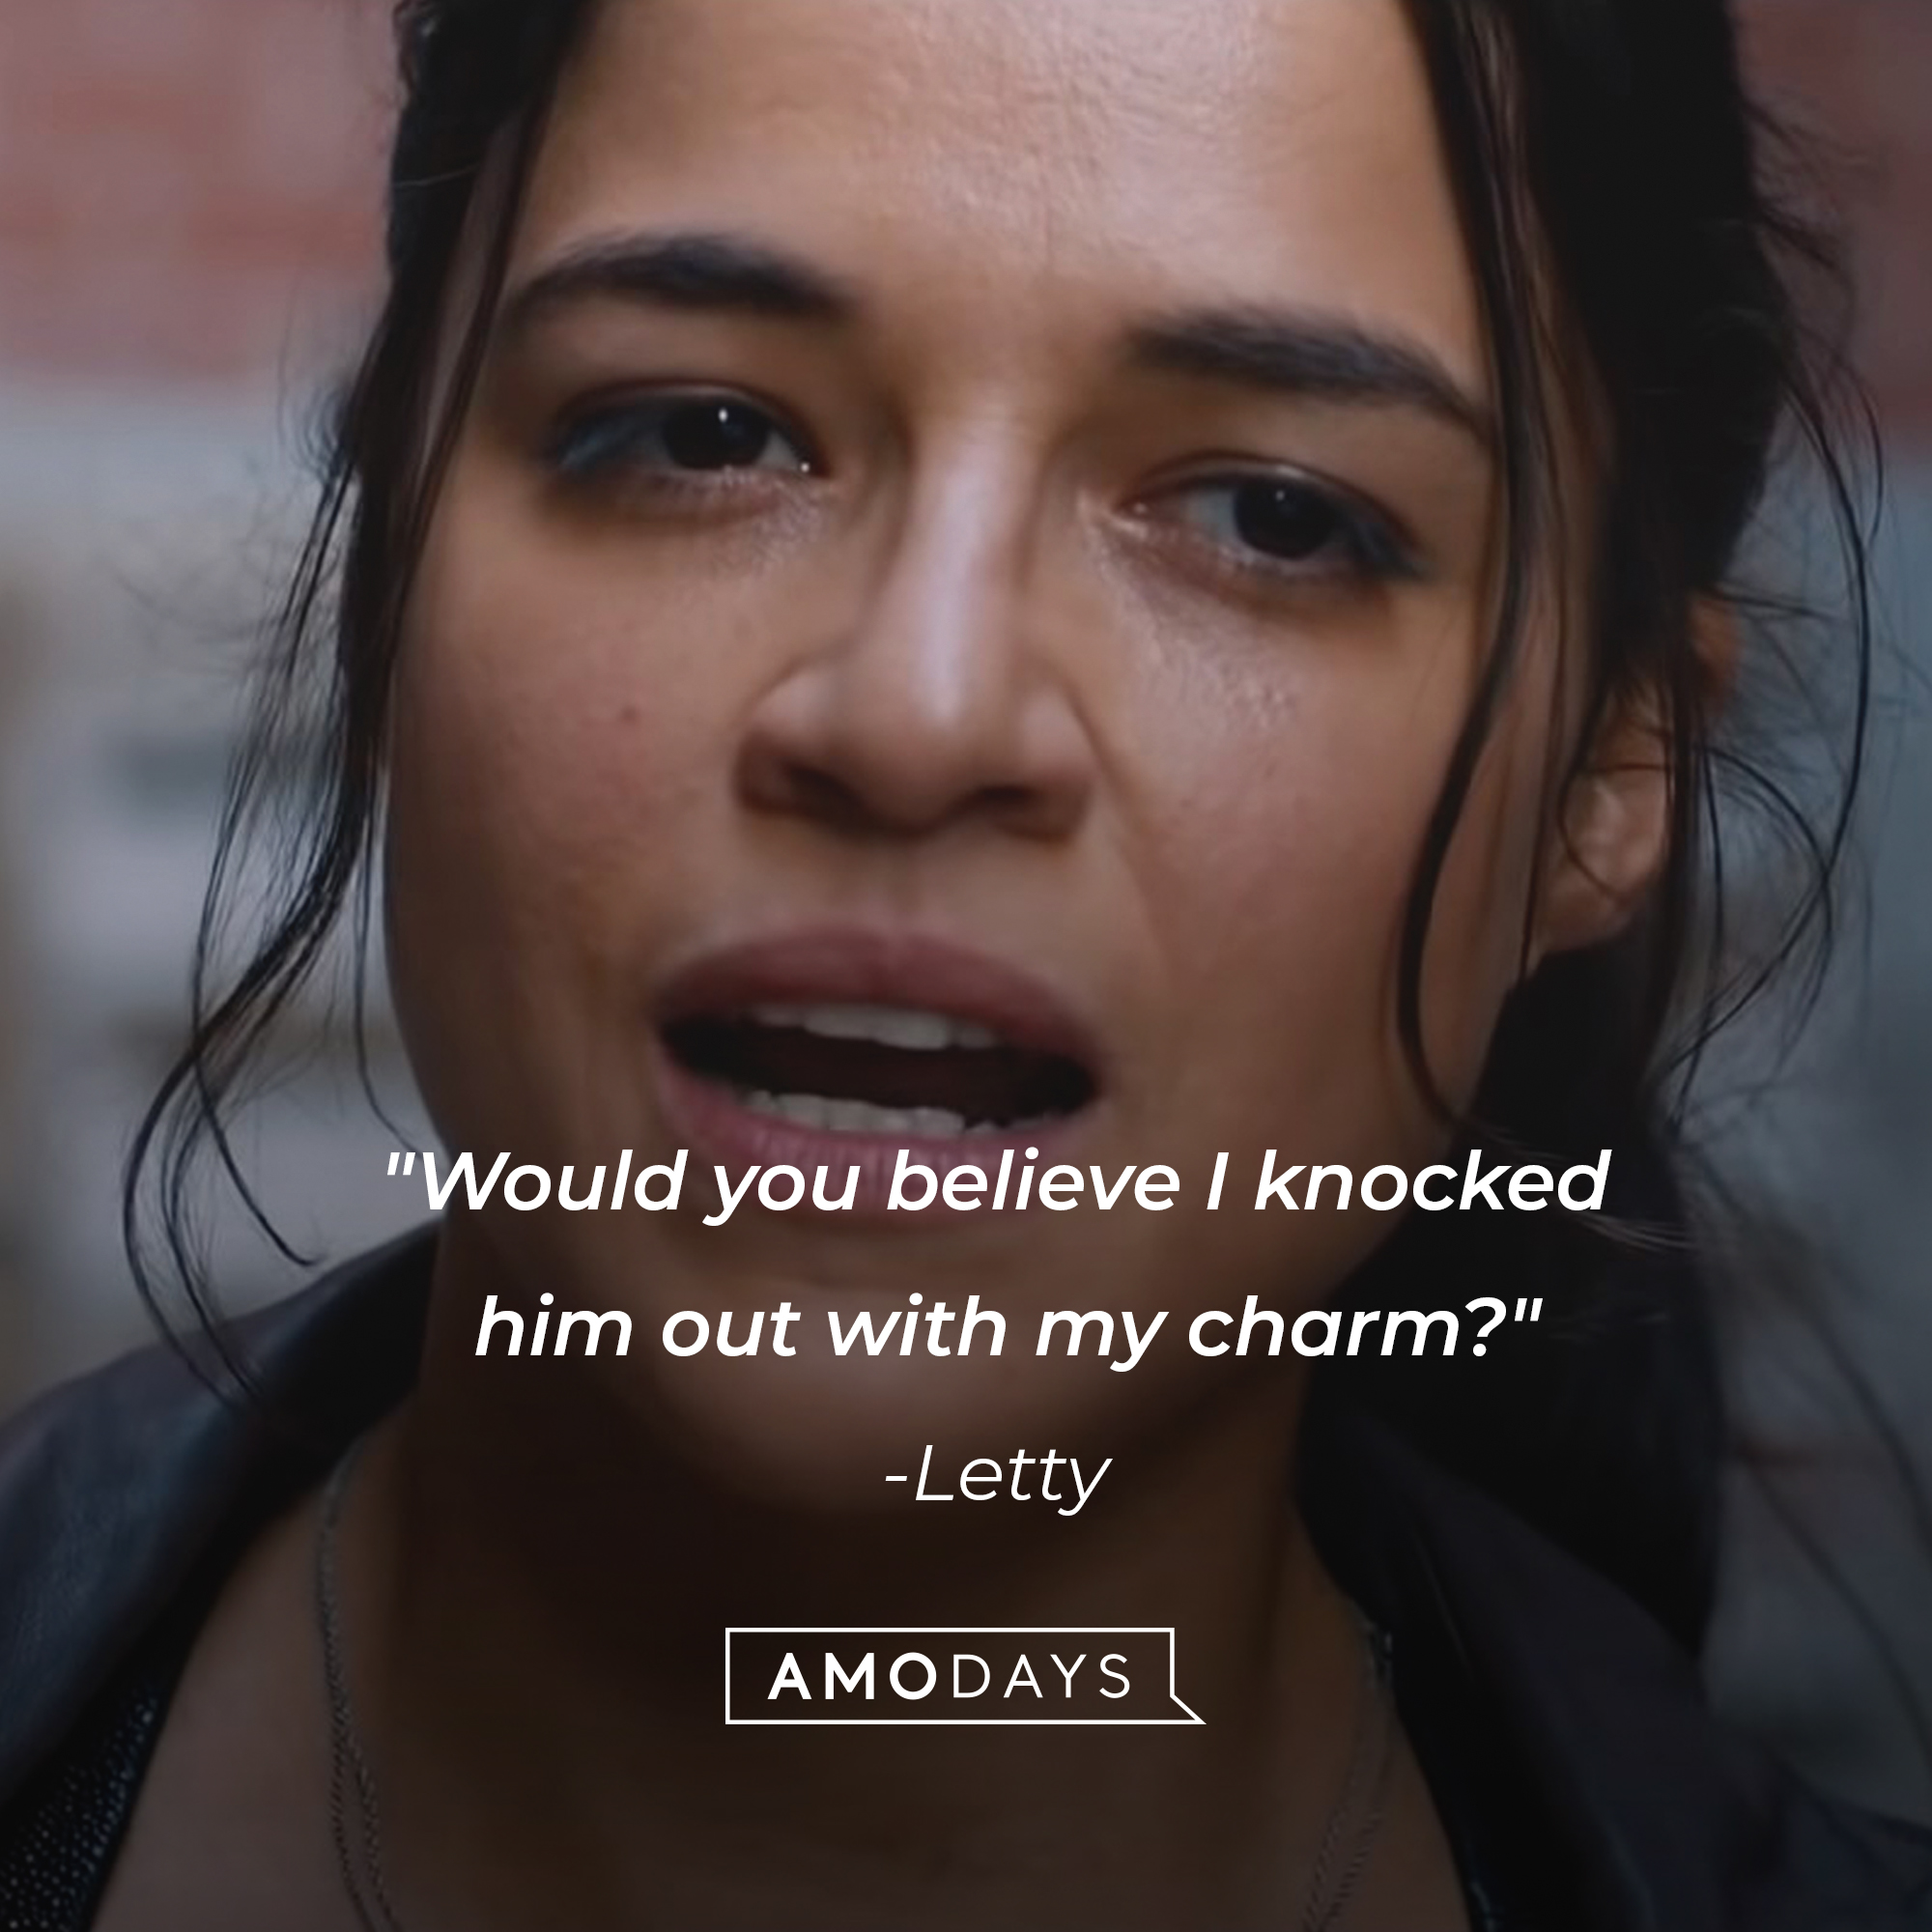 Letty's quote: "Would you believe I knocked him out with my charm? | Source: facebook.com/TheFastSaga